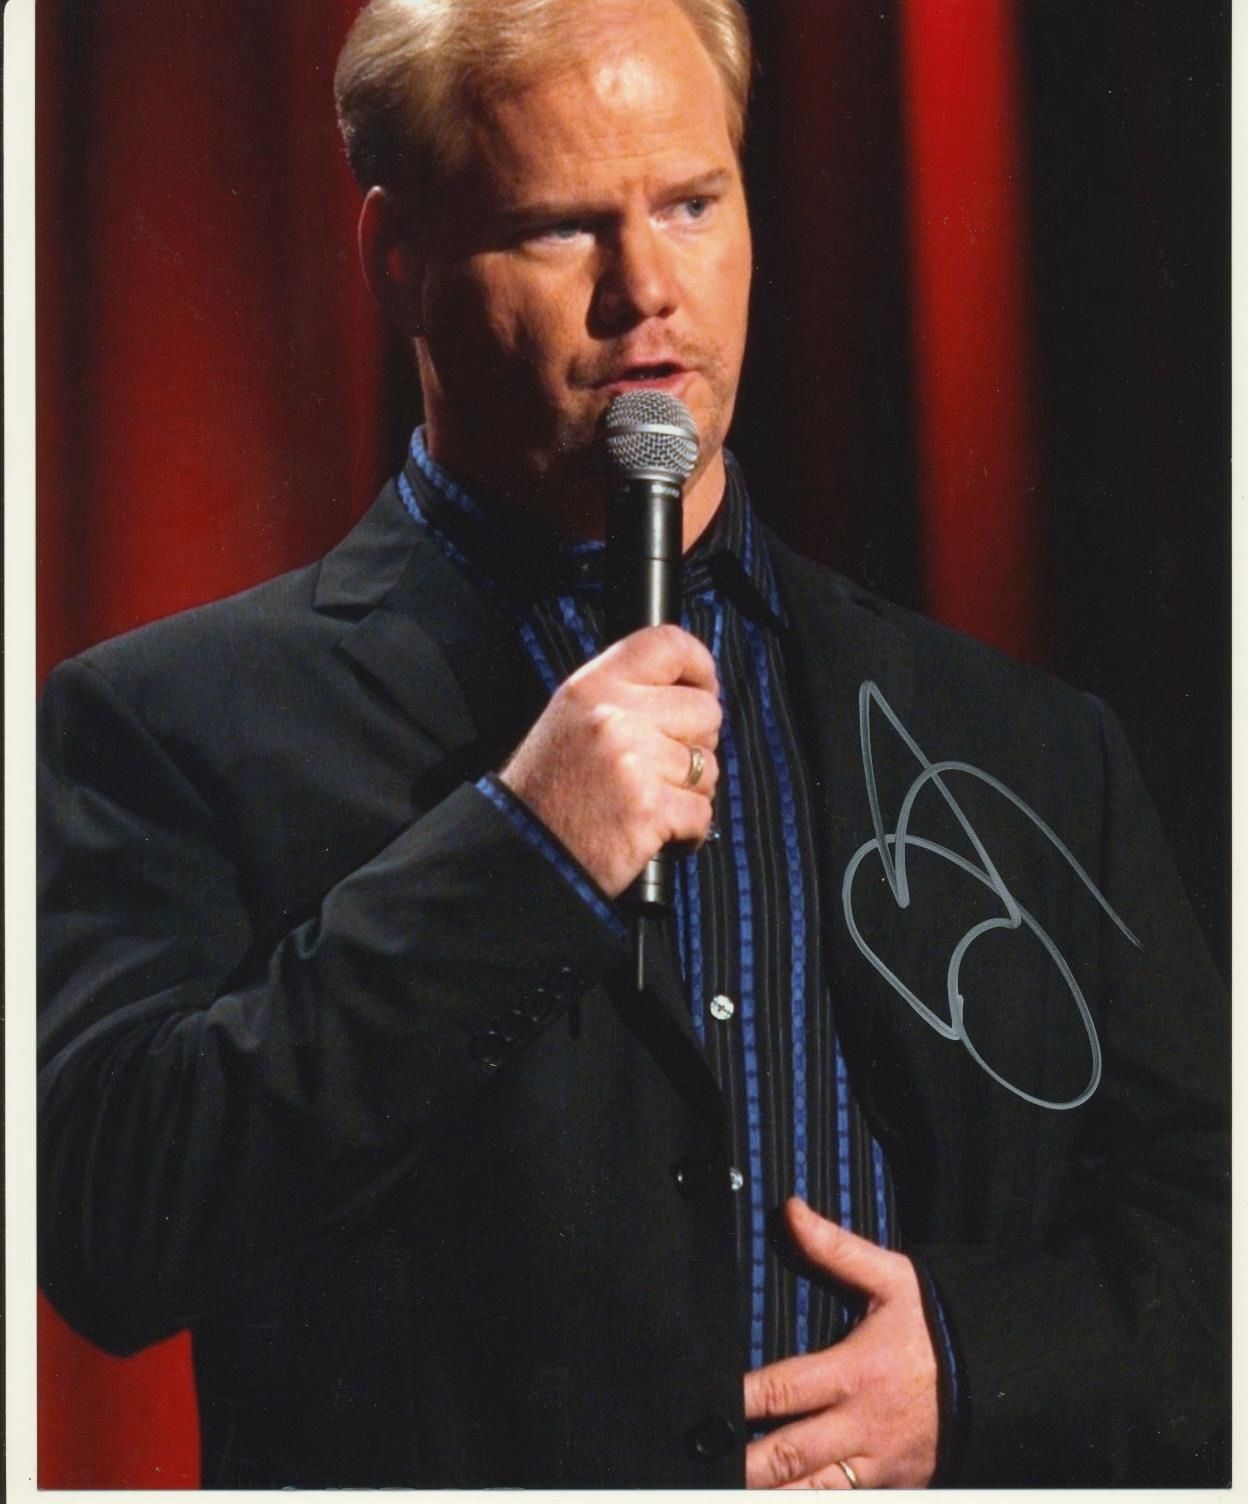 Jim Gaffigan Autograph Signed 10x8 Photo Poster painting AFTAL [2030]